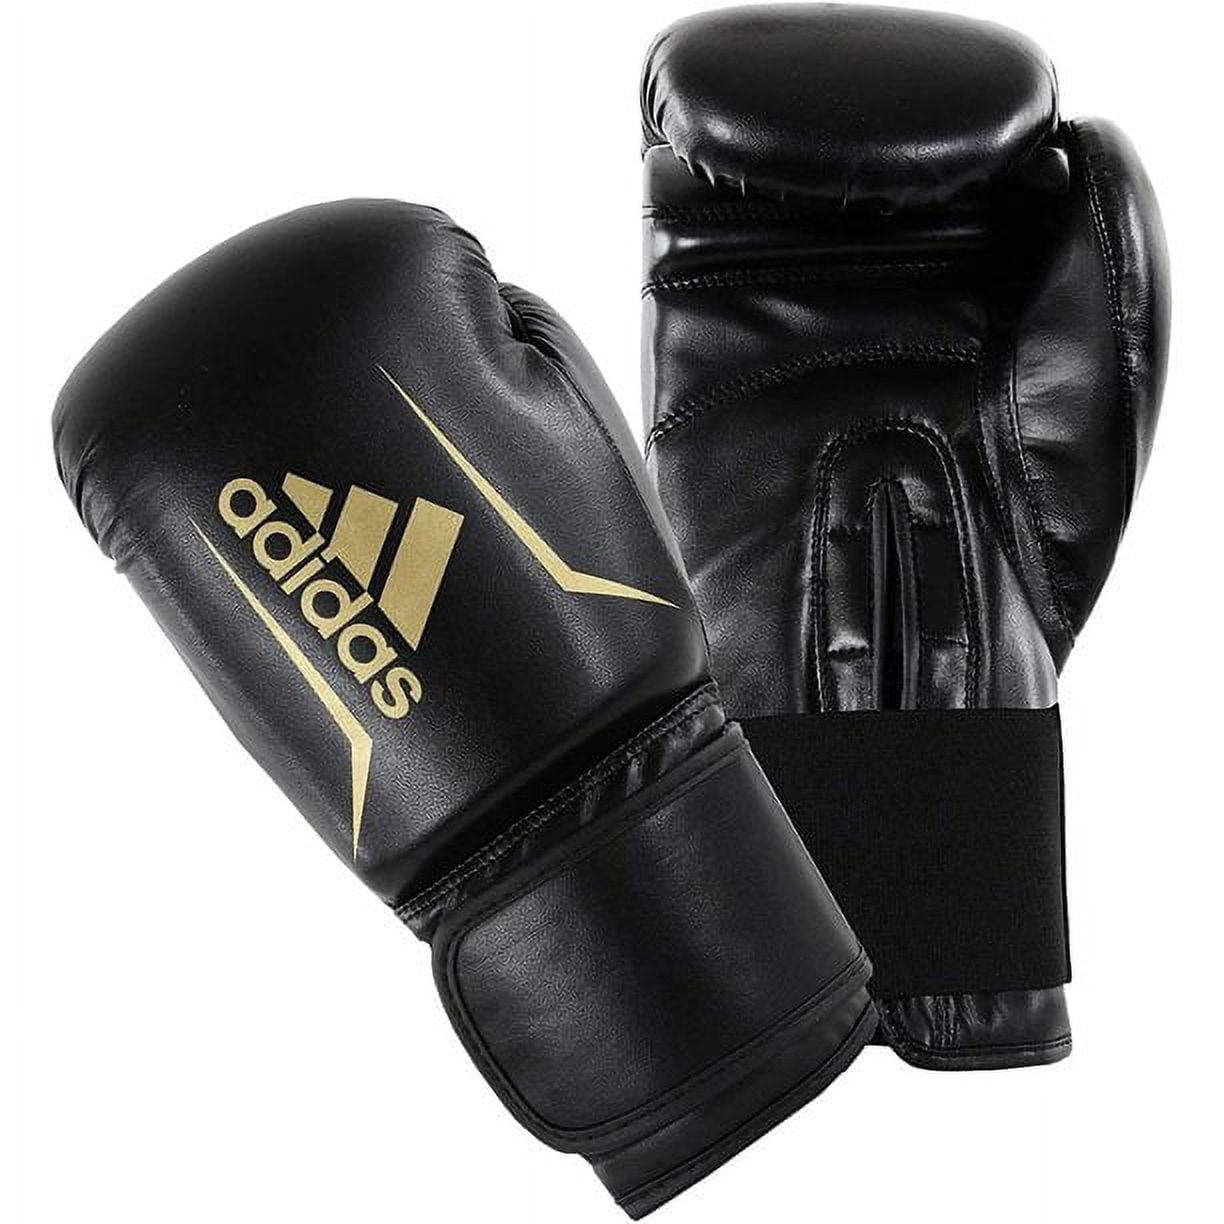 Sparring, Bags. Heavy Women and Kickboxing FLX 10oz Training, White,Gold 3.0 & Boxing adidas Punching, for Speed Fitness 50 and Gym, Light Gloves Men for